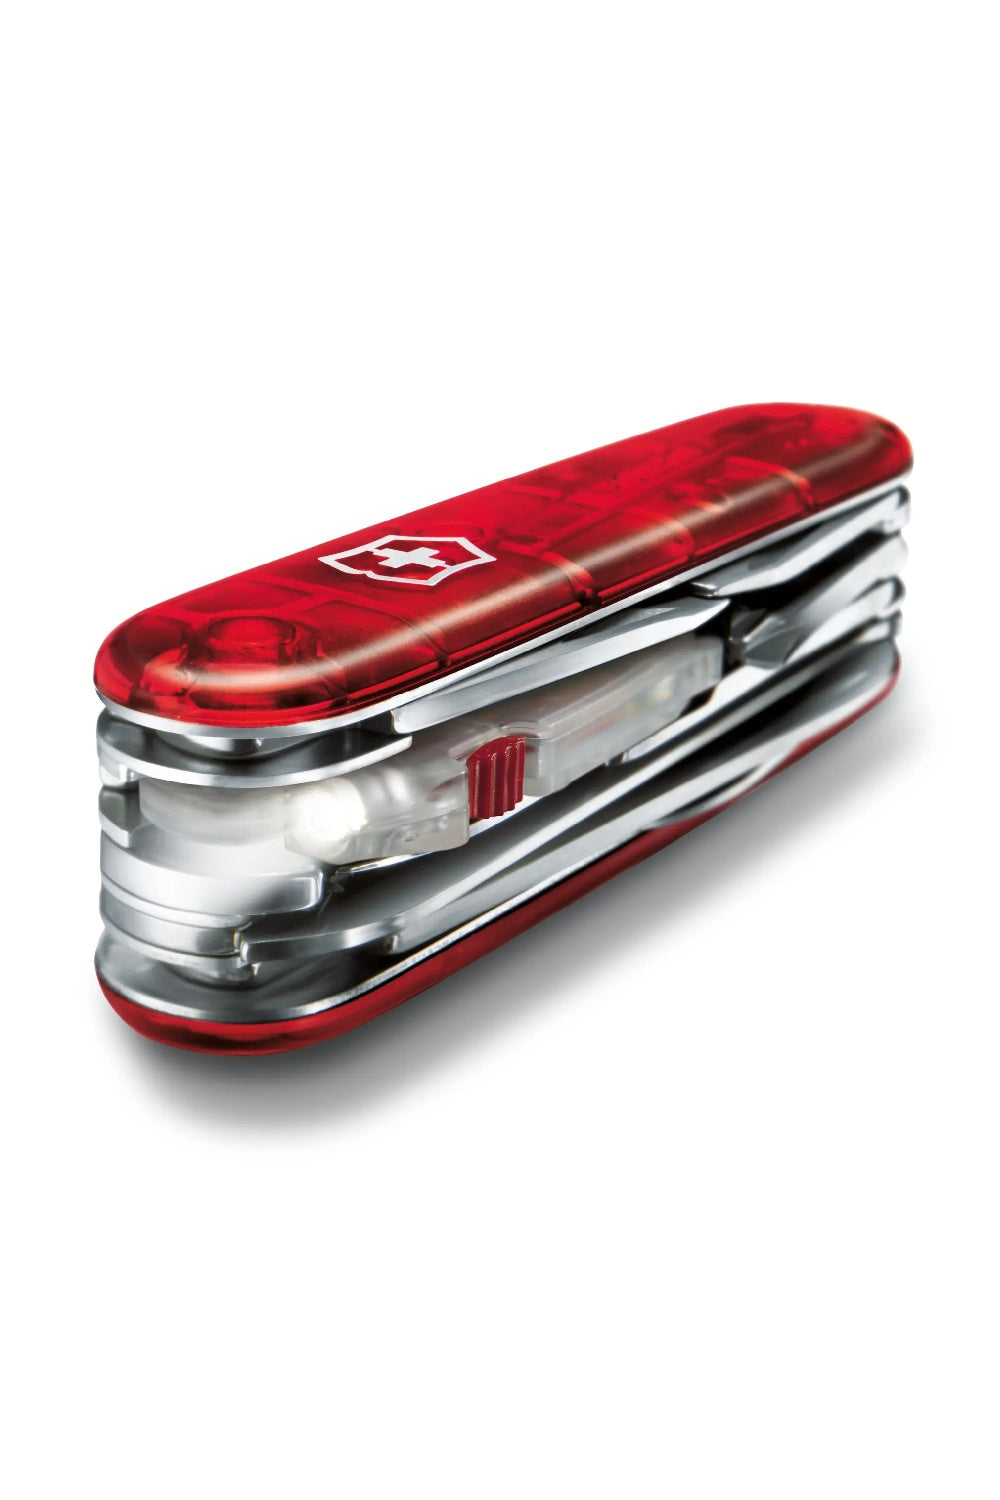 Victorinox Huntsman Lite Swiss Army Medium Pocket Knife with Wood Saw and LED in Red Transparent